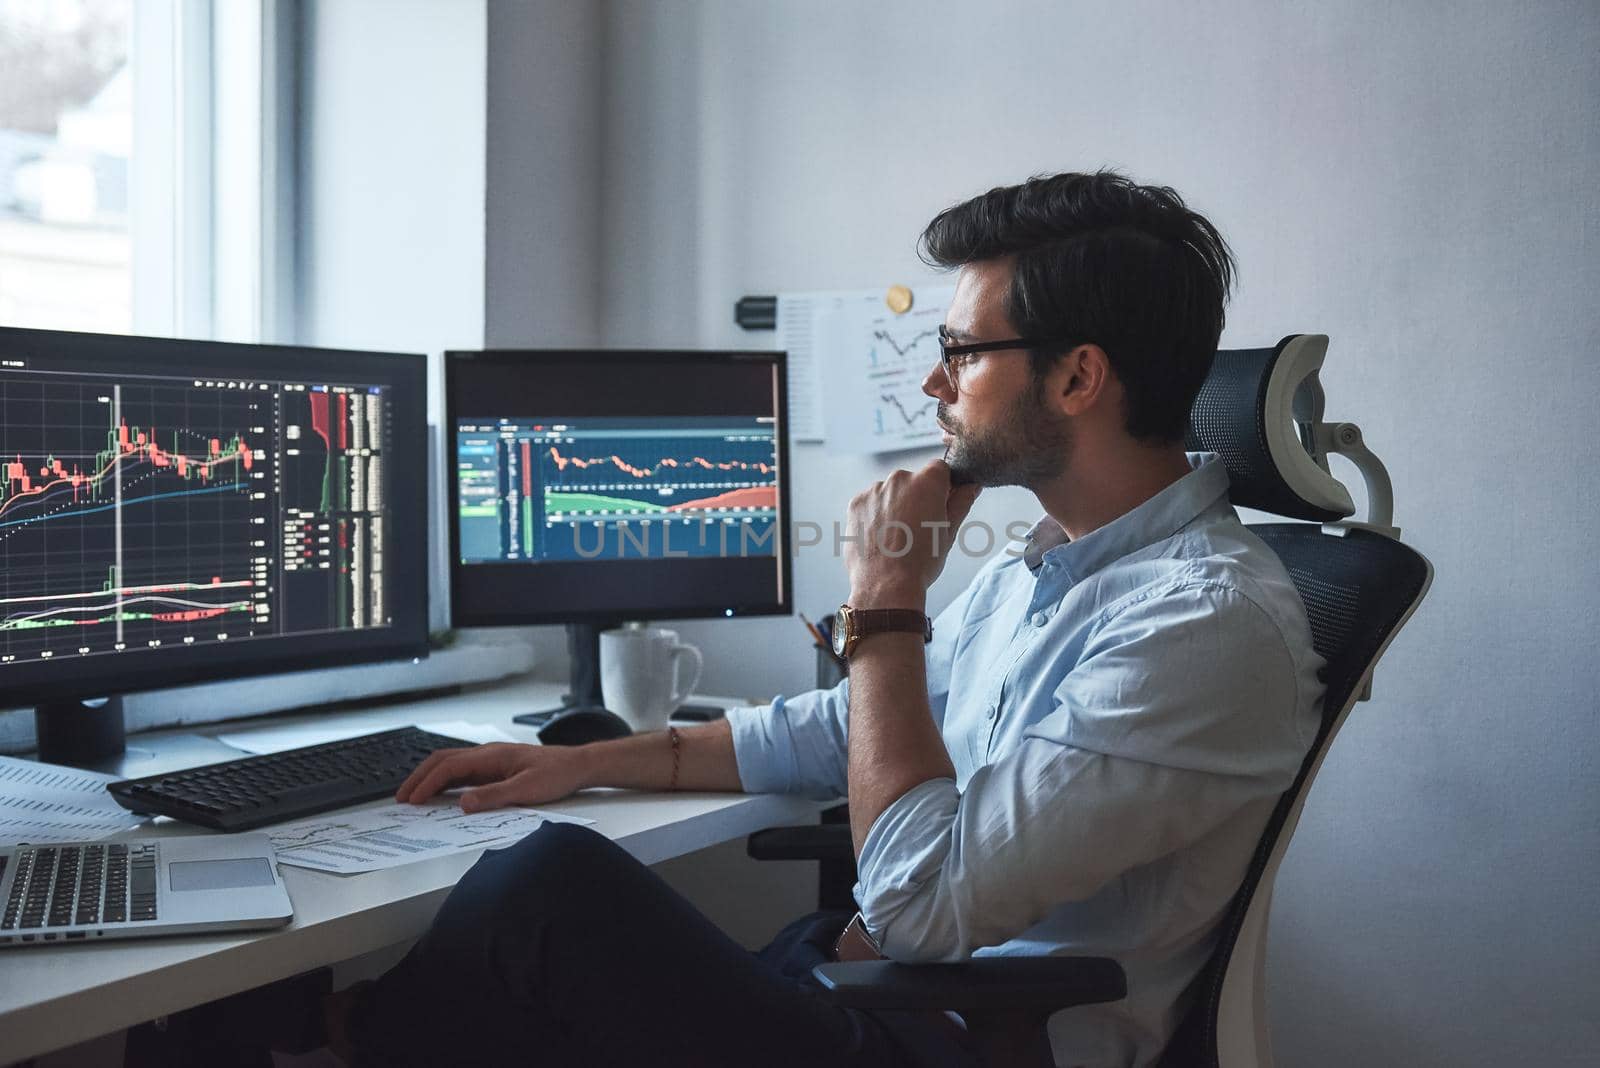 Busy working day. Side view of successful trader or businessman in formal wear and eyeglasses working with charts and market reports on computer screens in his modern office by friendsstock